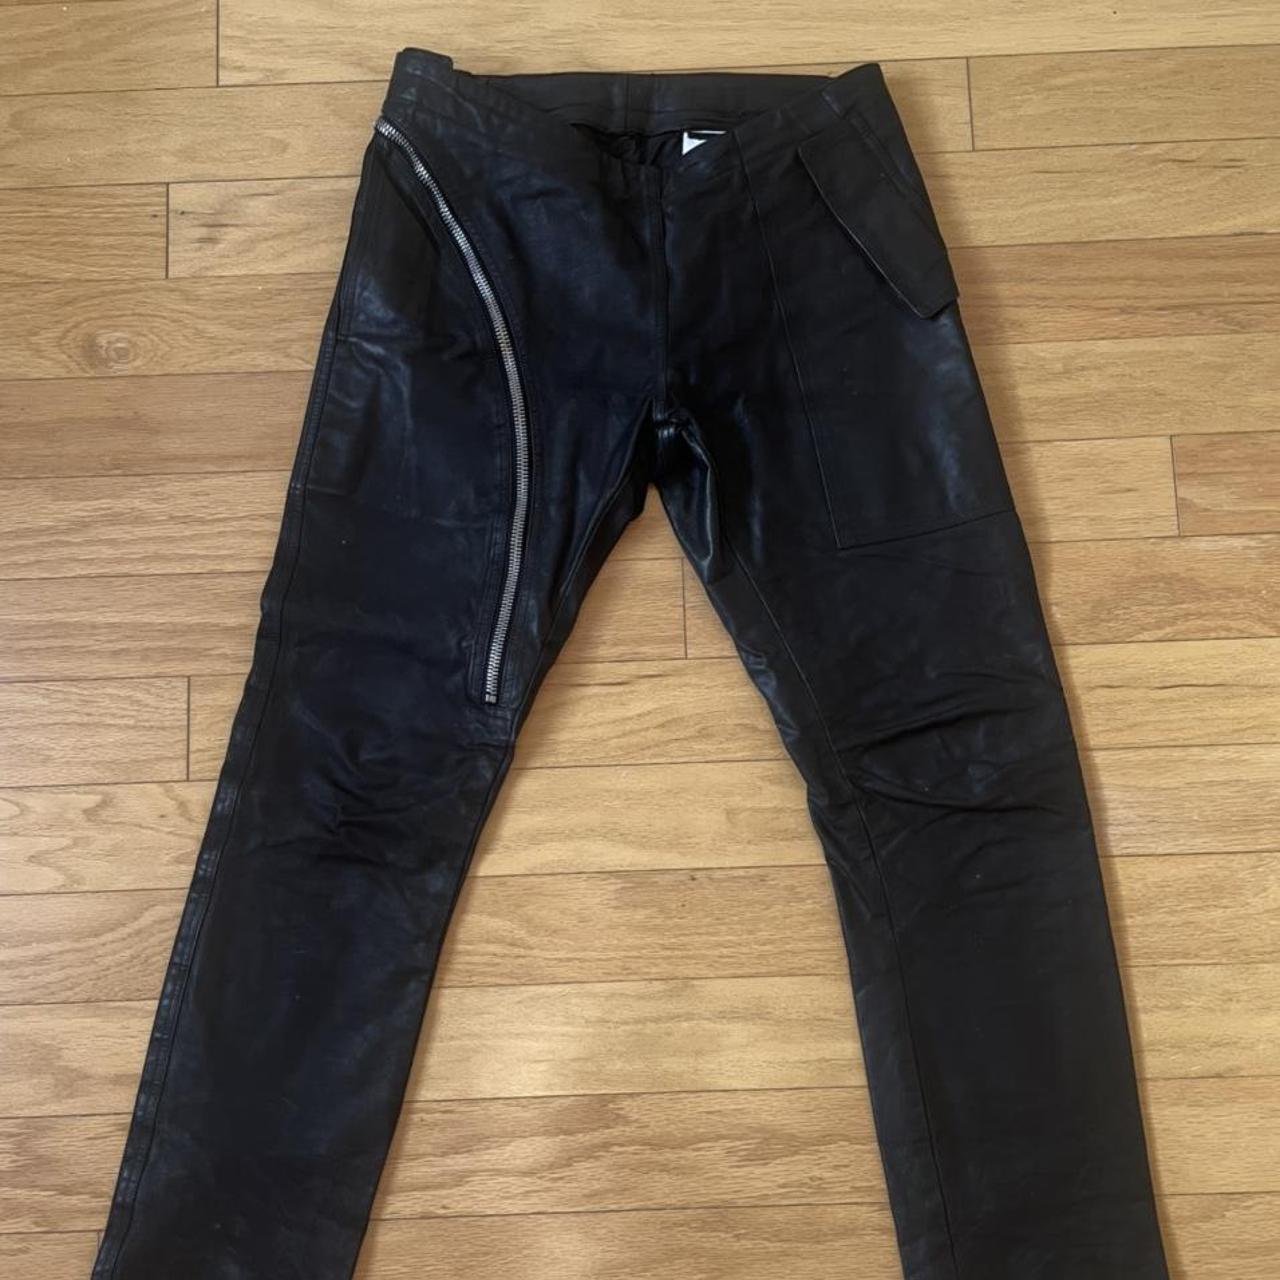 Rick Owens Leather Aircuts Size 30-32 9/10 condition... - Depop